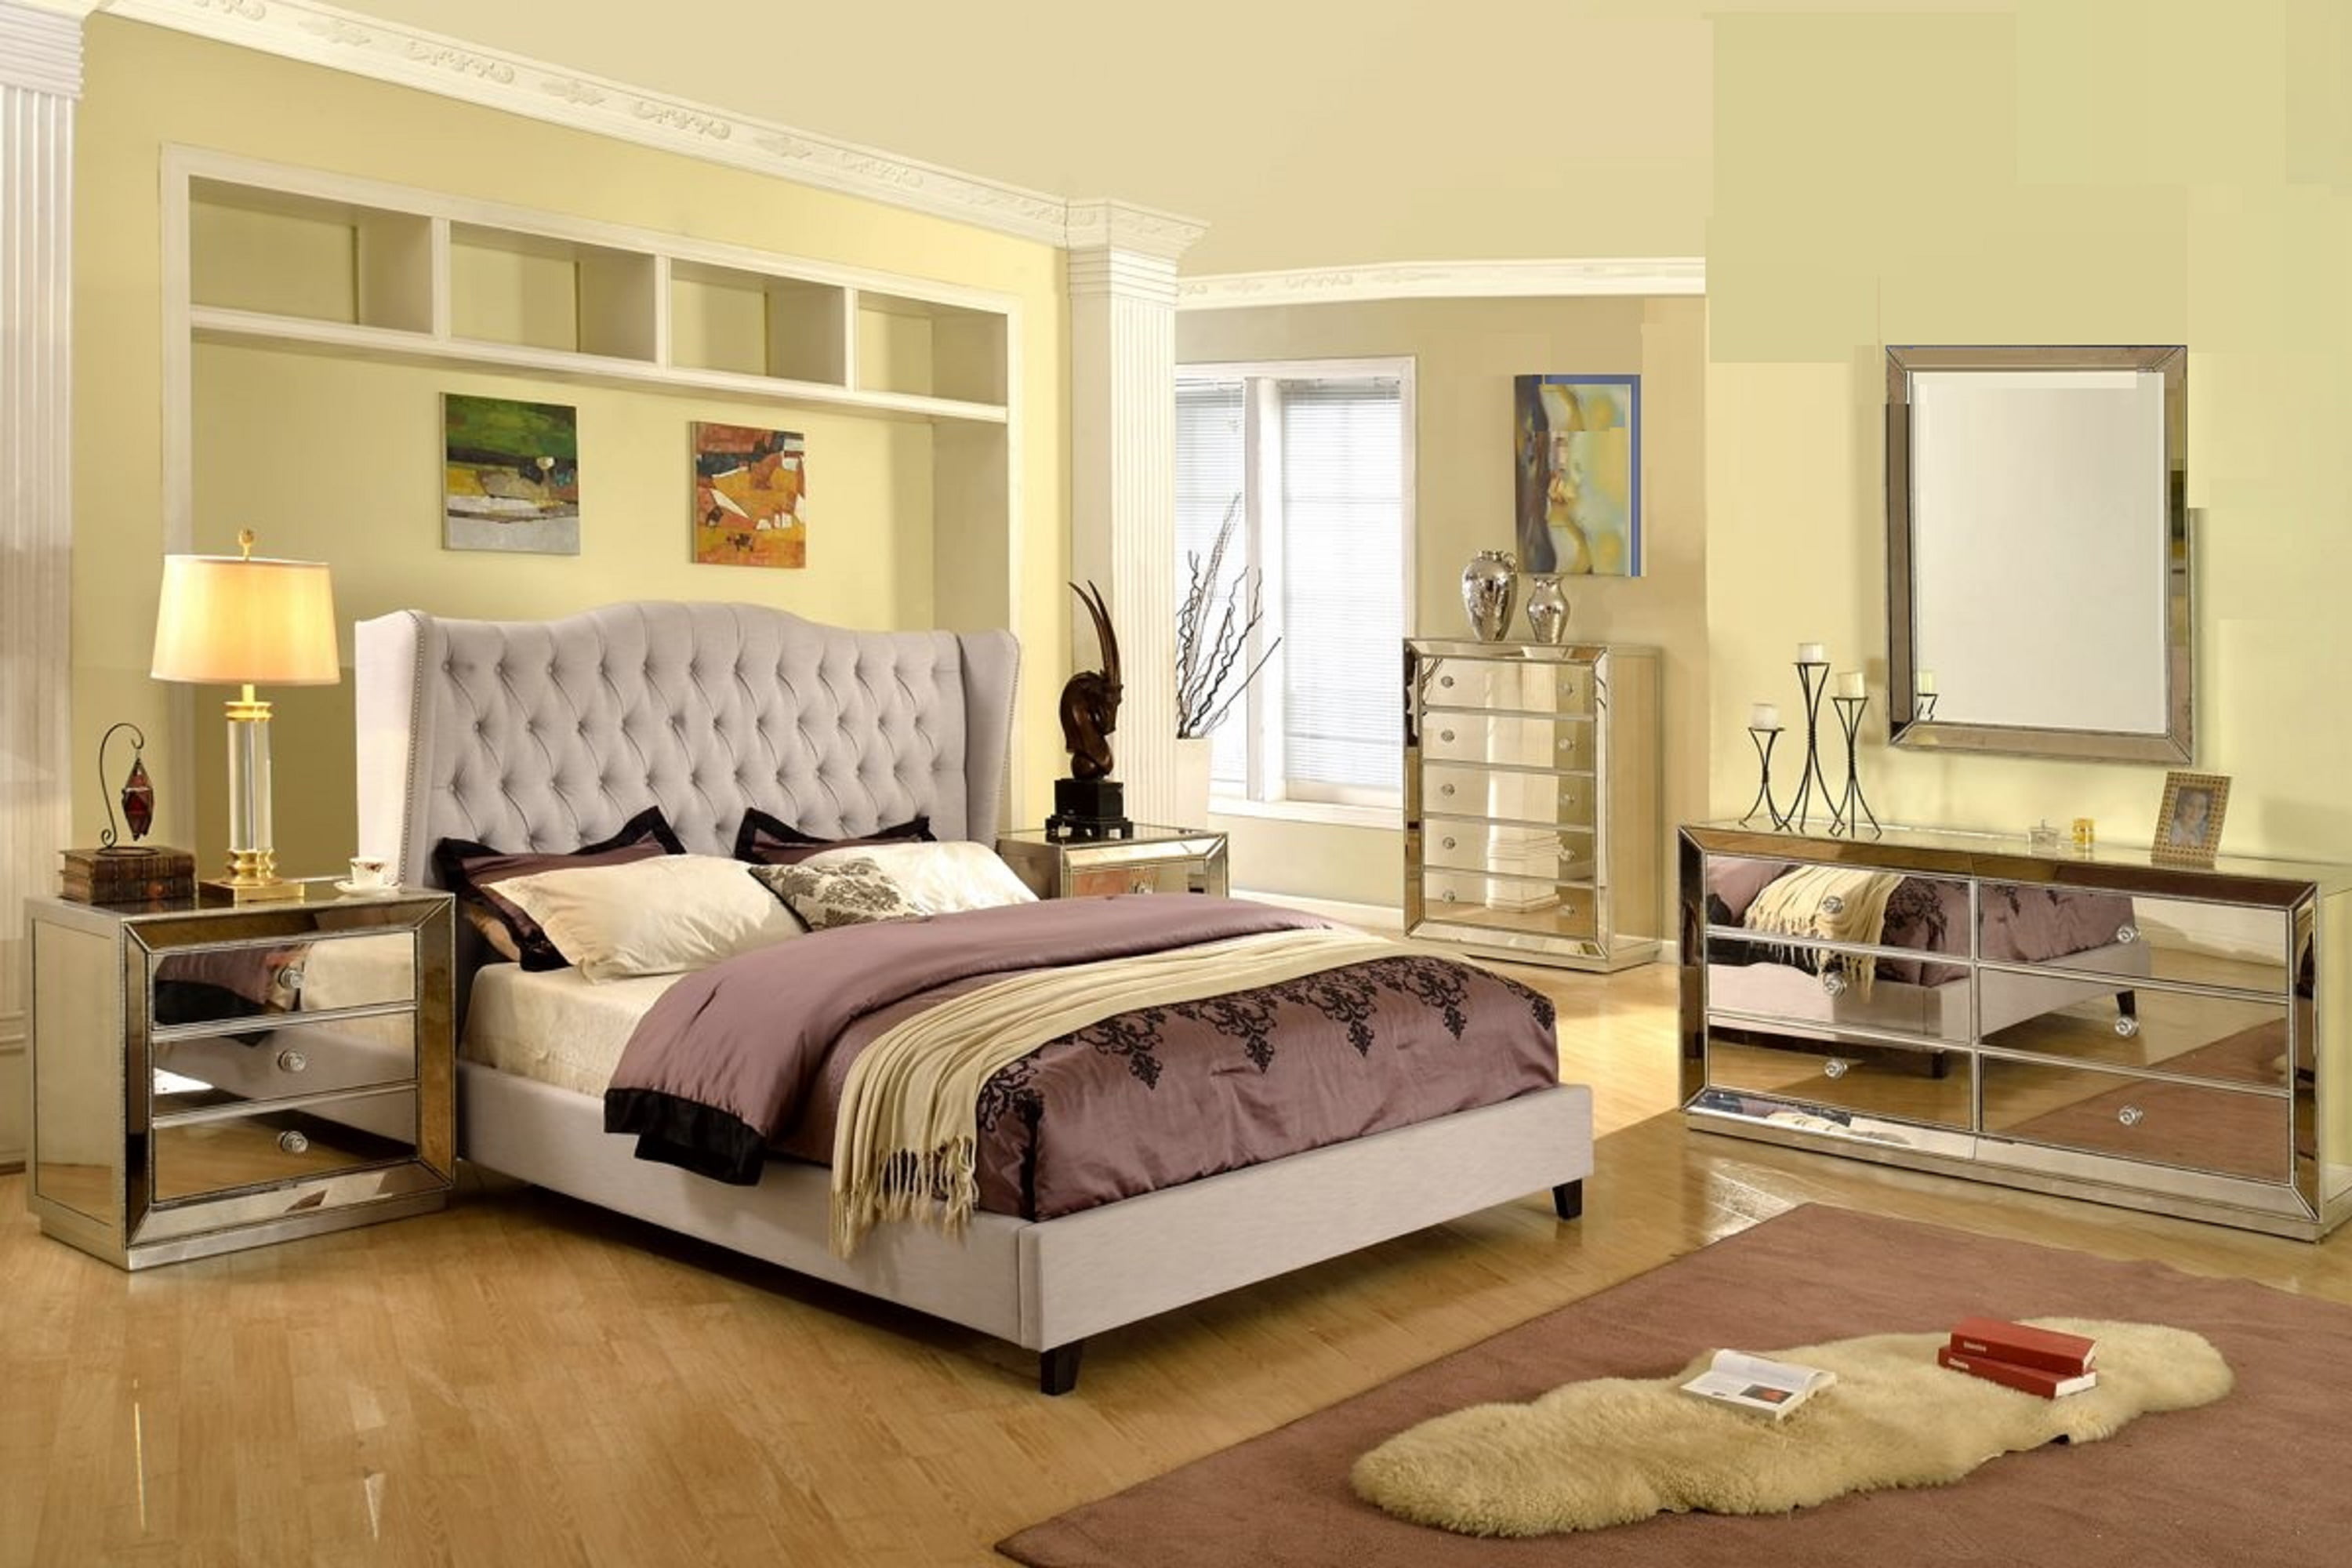 Formal Silver Mirrored Jameson Bedroom Set Taupe Color